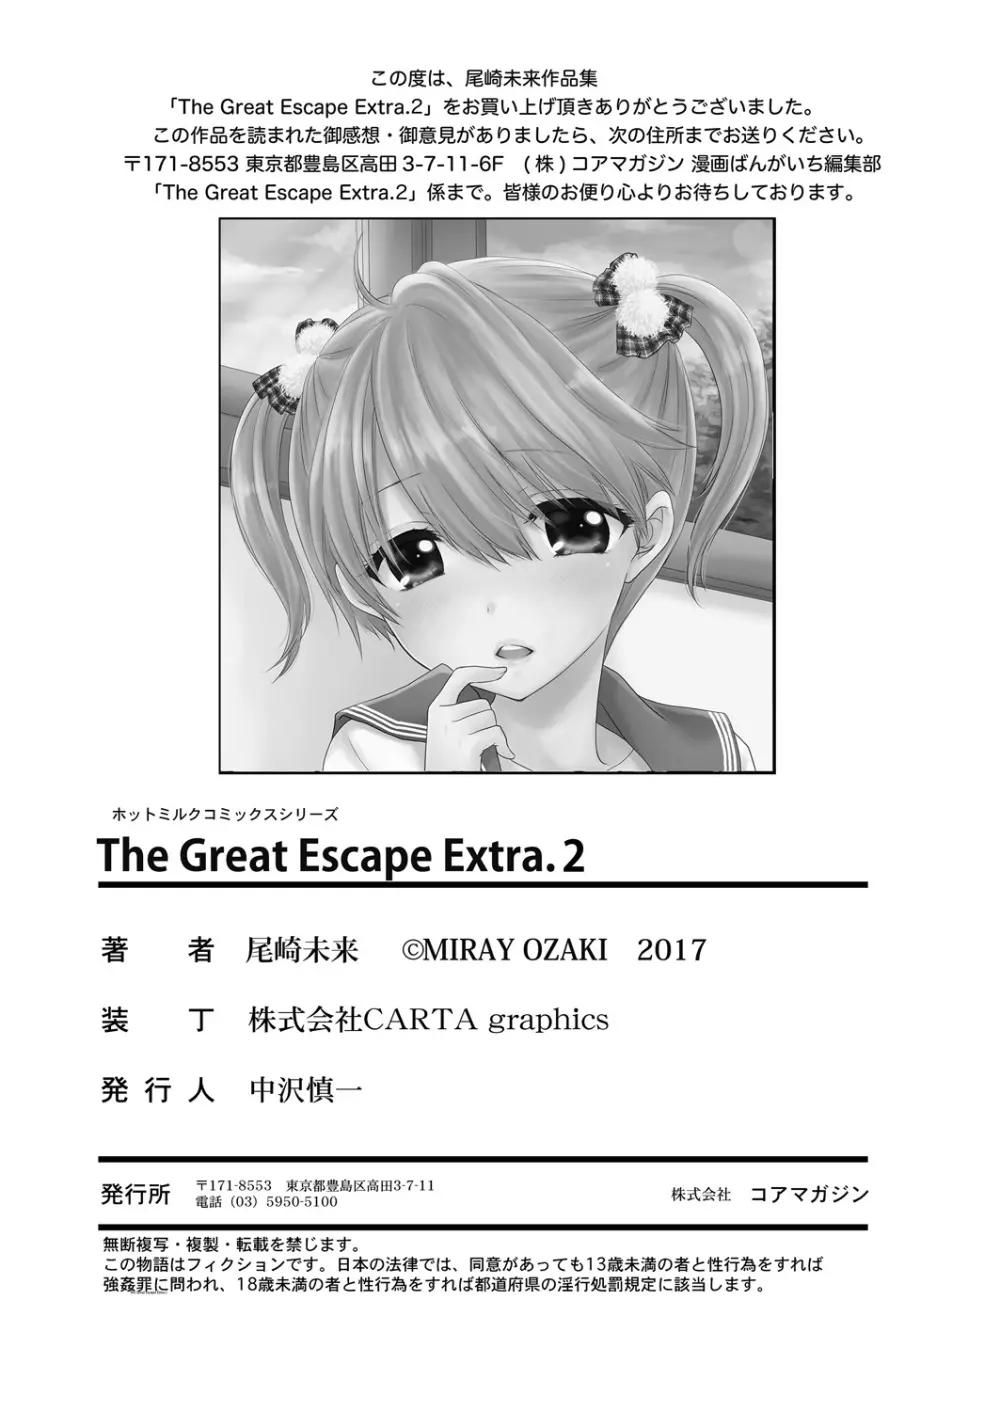 The Great Escape Extra. 2 69ページ